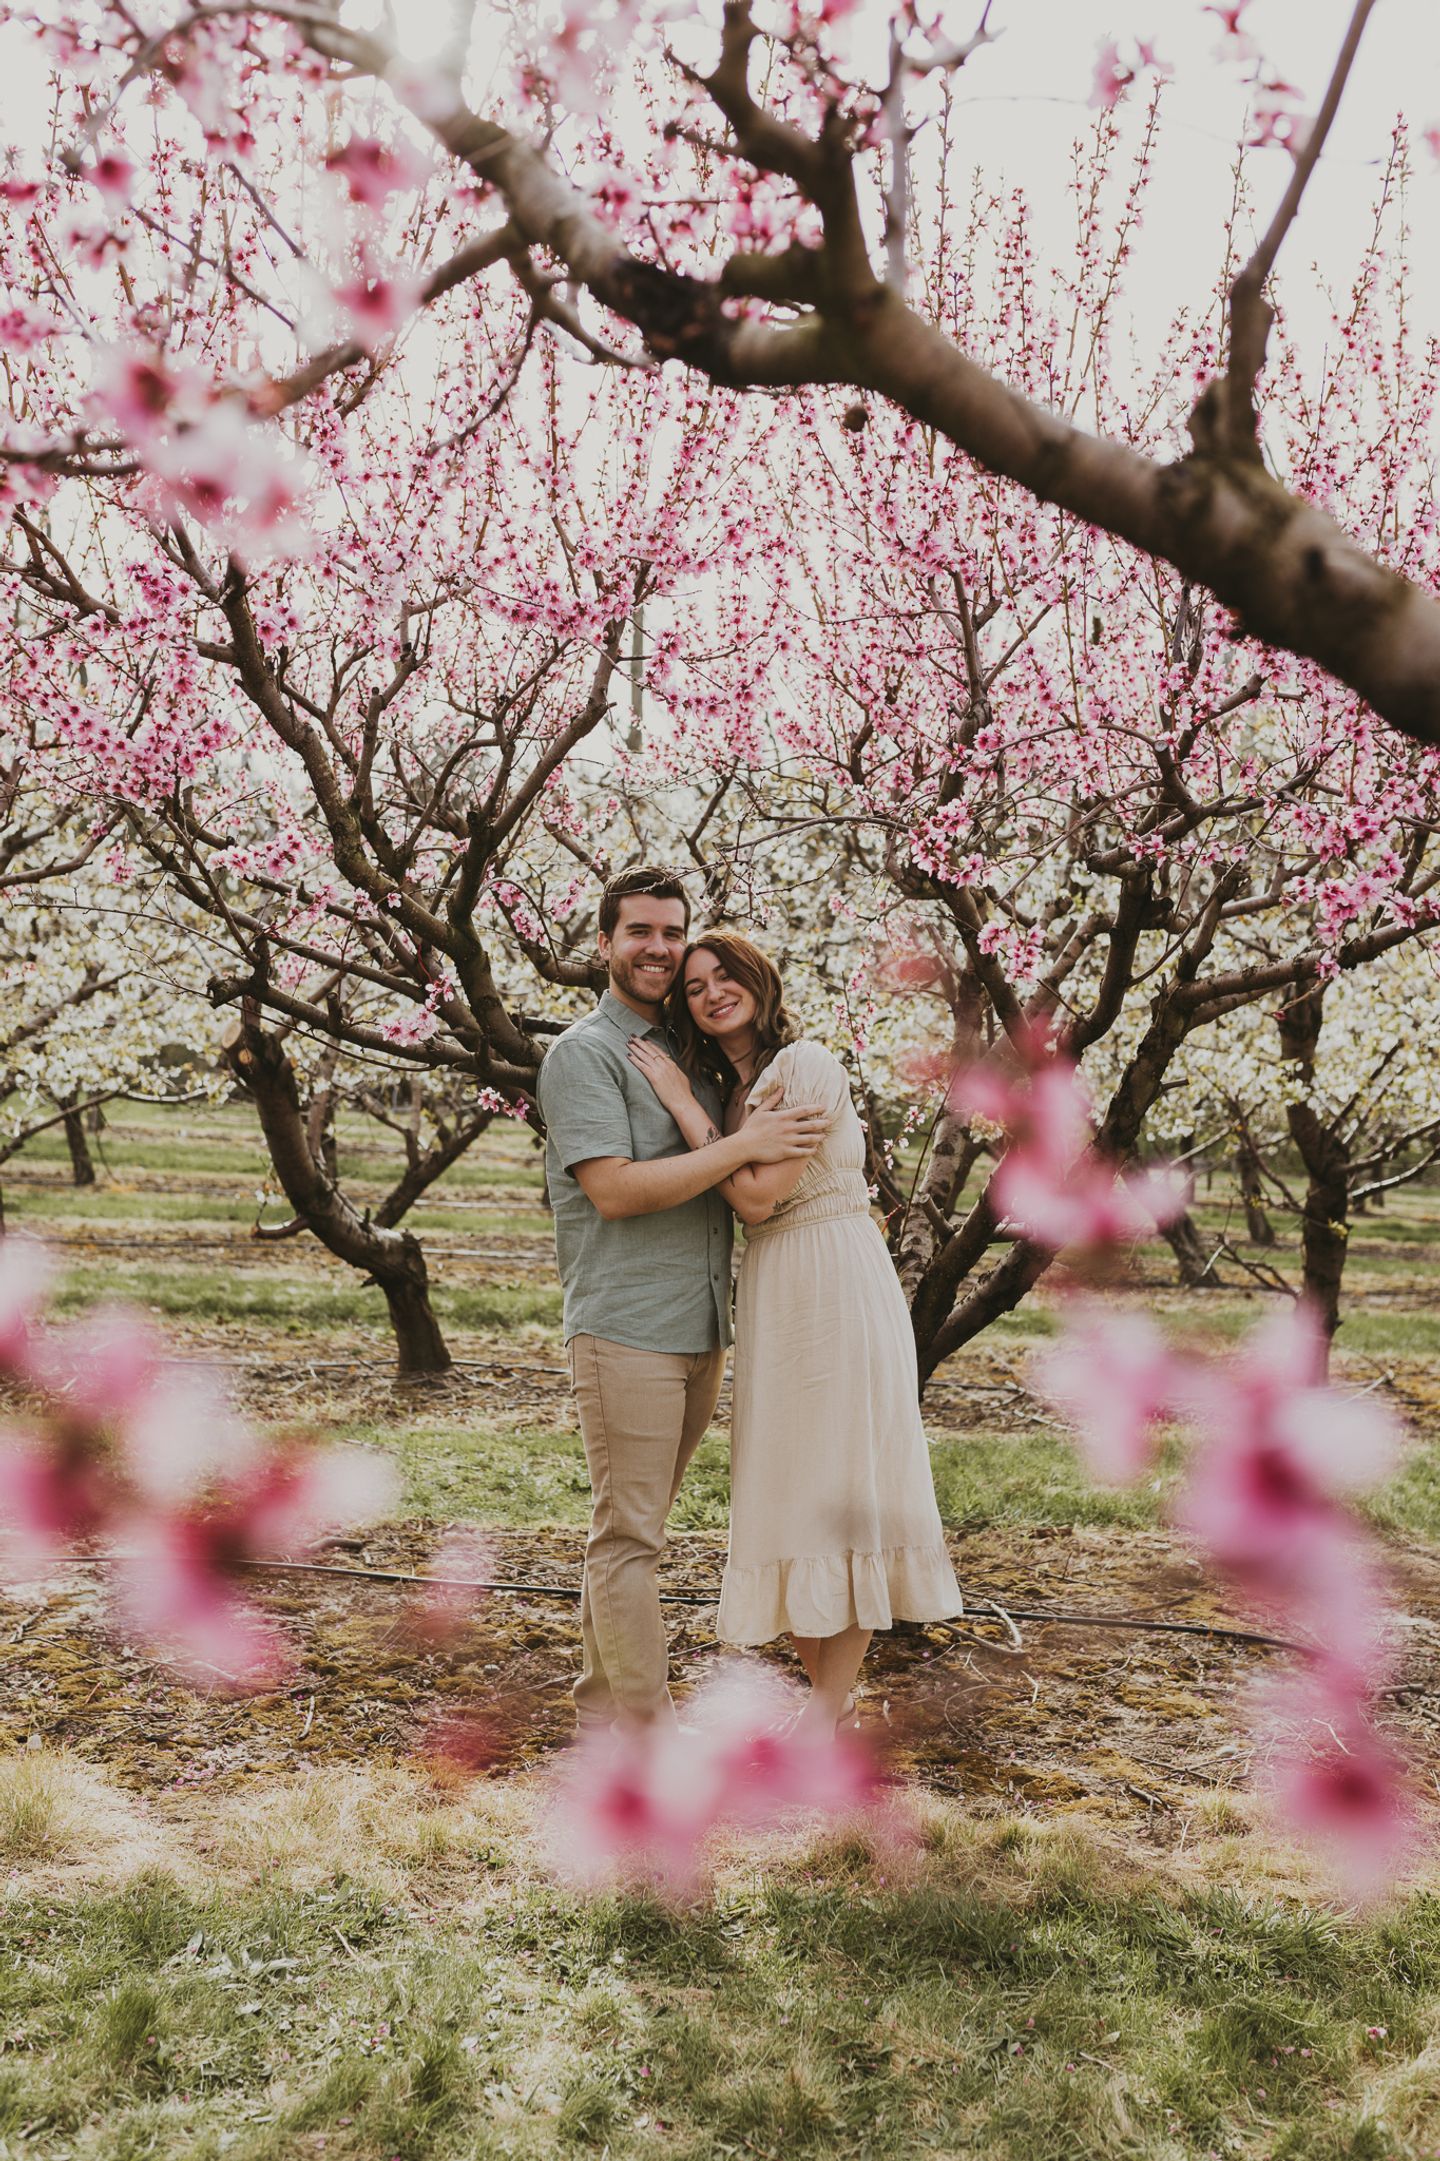 Spring Couples' Photoshoot at Robinette's Orchard